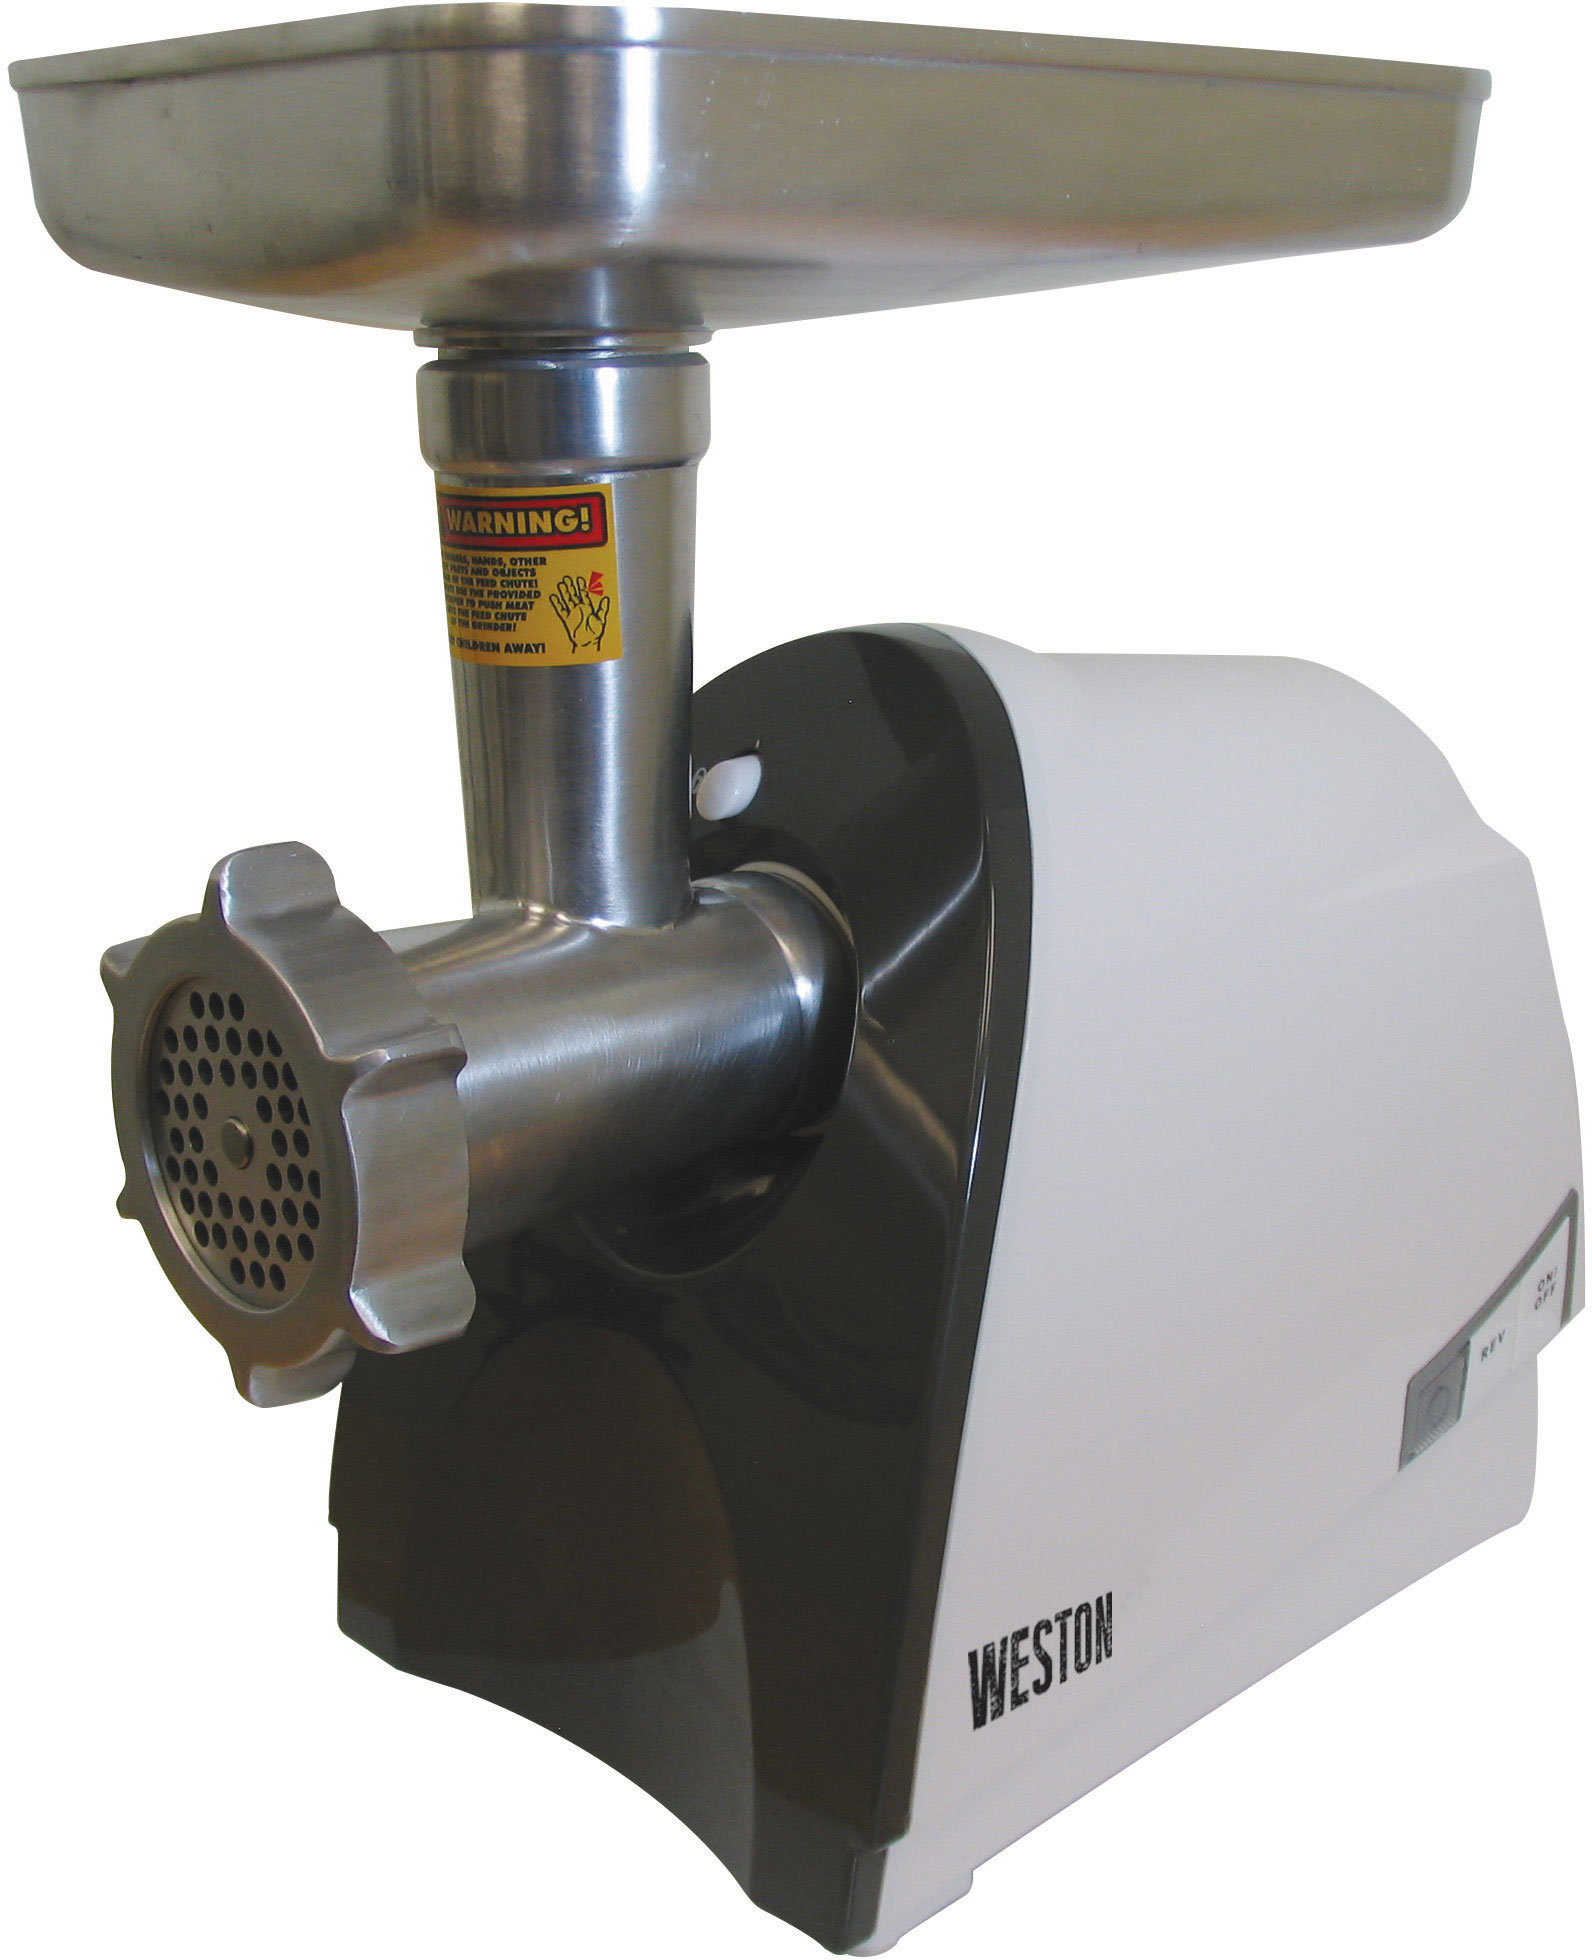 https://op2.0ps.us/original/opplanet-weston-products-n-8-heavy-duty-electric-meat-grinder-and-sausage-stuffer-575-watt-white-33-0201-w-main